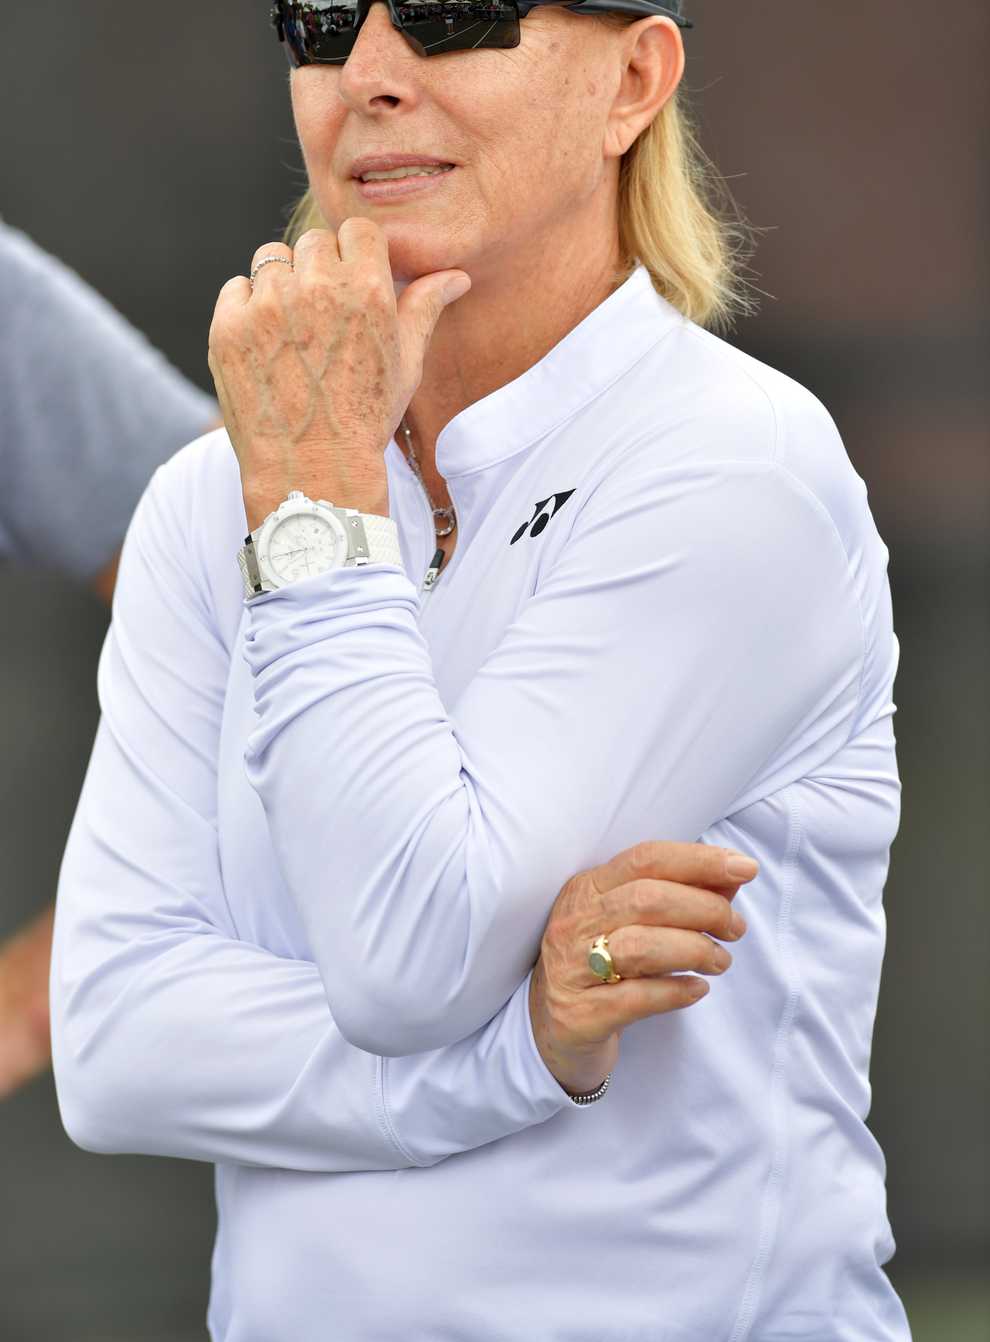 Martina Navratilova has penned a full letter criticising Court's outbursts (PA Images)